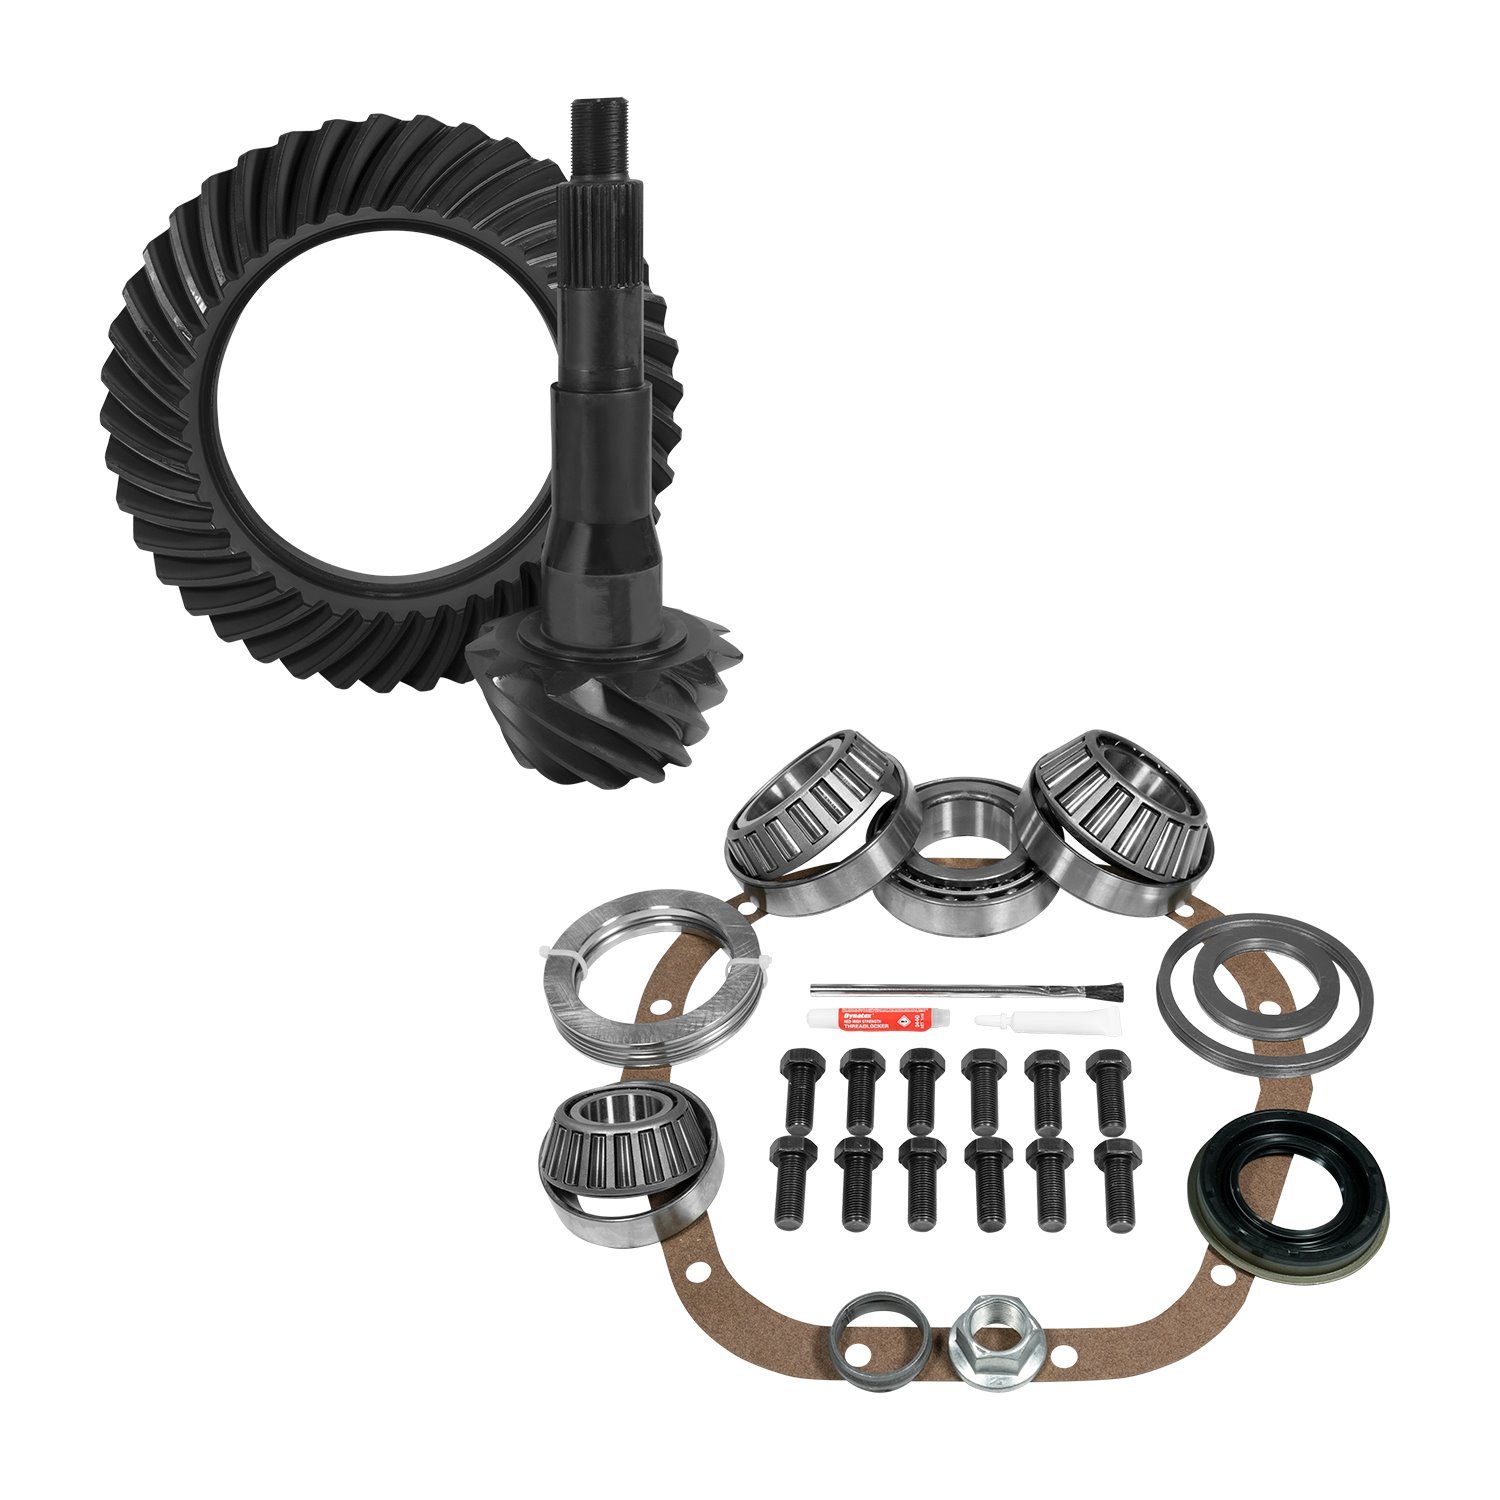 USA Standard 10849 Ring & Pinion And Install Kit, 10.5 in. Ford, 4.11 Rear